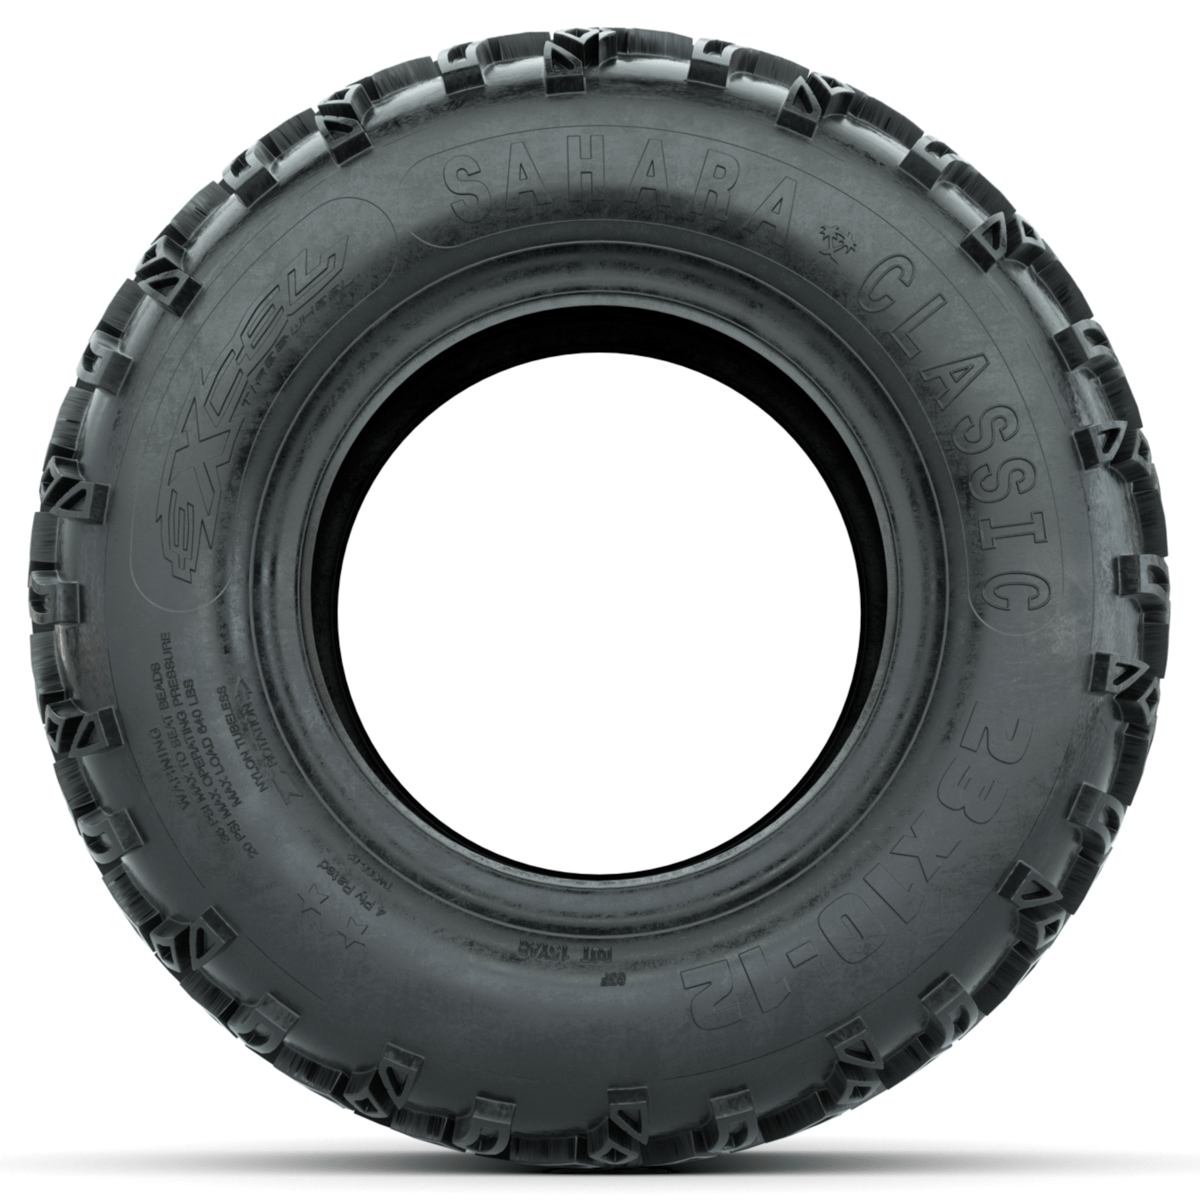 23x10-12 Sahara Classic A / T Tire (Lift Required)